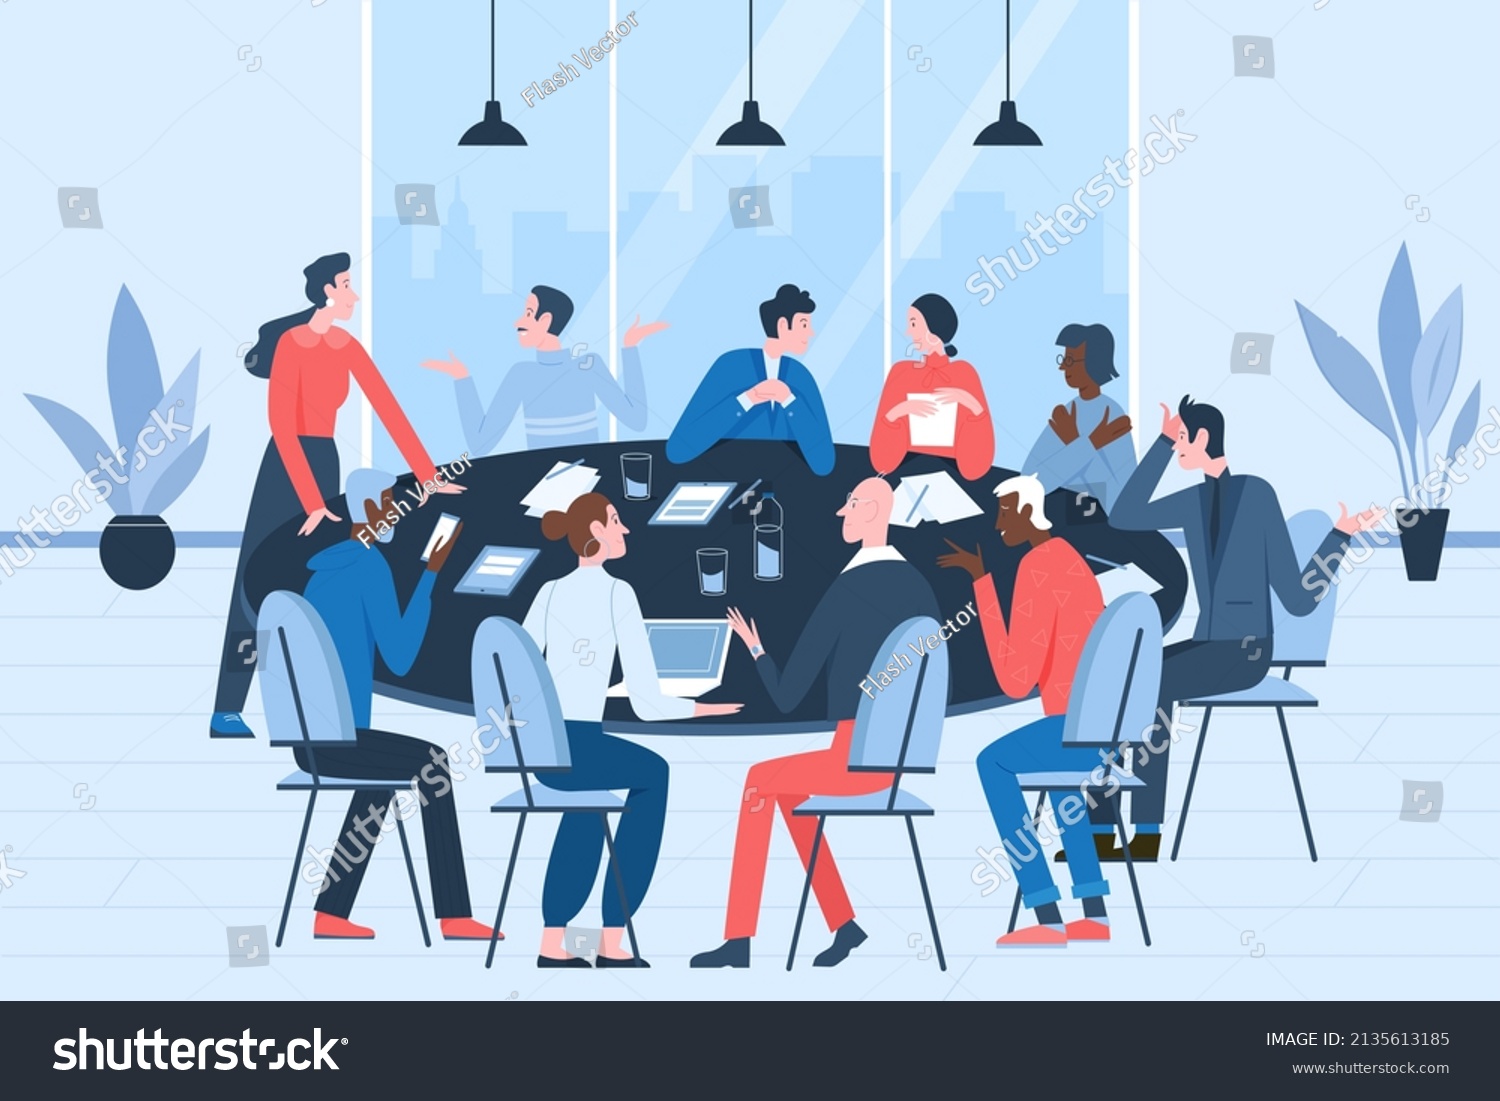 SVG of Cooperation of business people on conference or dispute. Team of employees sitting at round table together and discussing ideas or brainstorming flat vector illustration. Teamwork, brainstorm concept svg